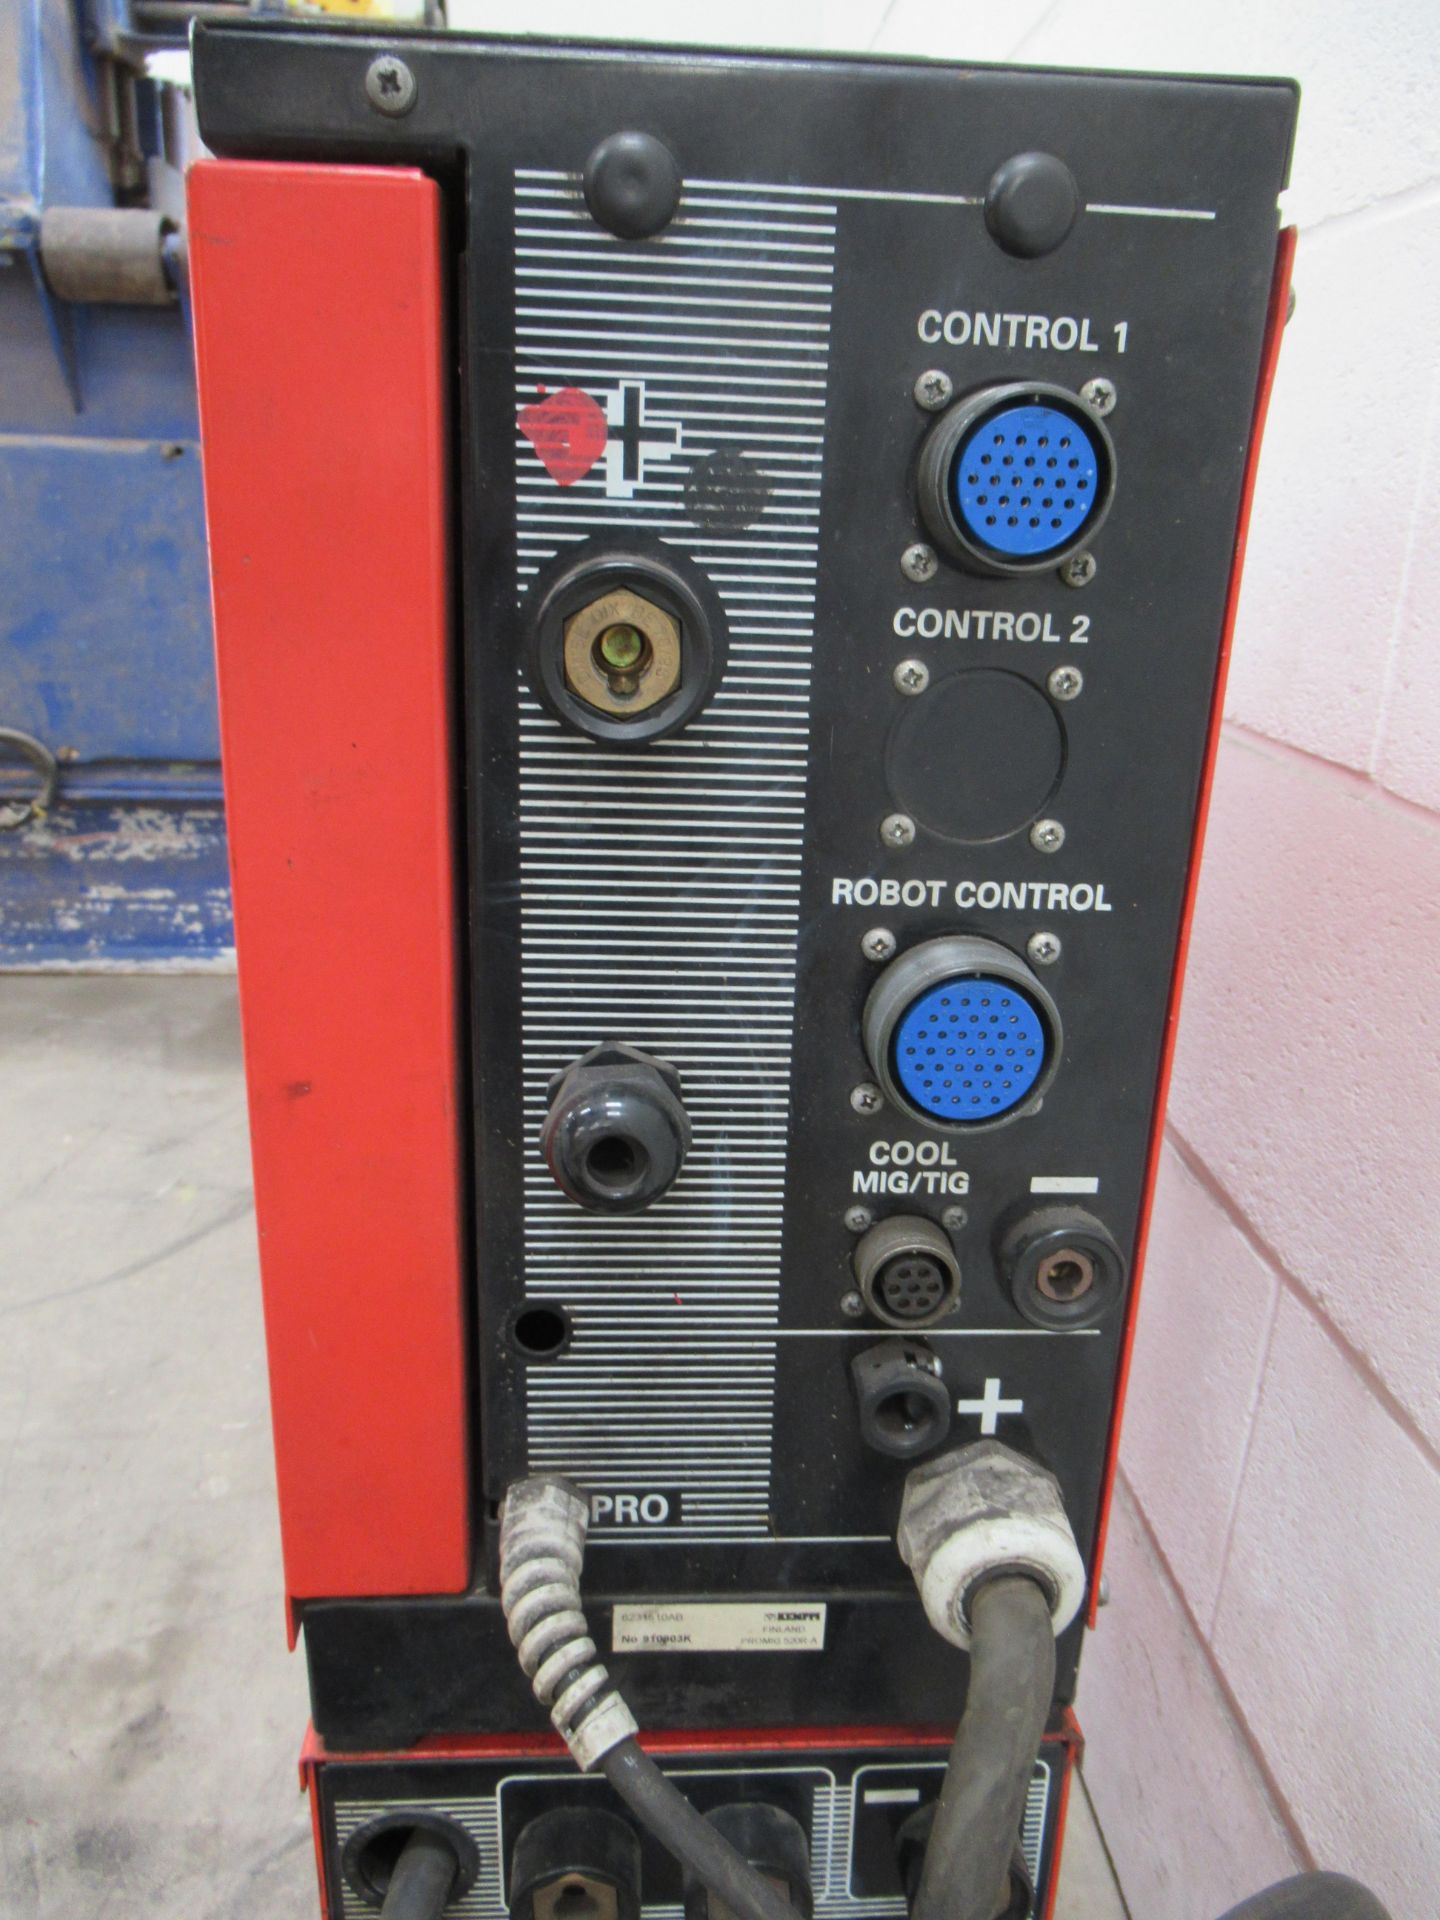 Kemppi ML synergic promig 520R welder with Kemppi Pro 3000 power source, c/w leads and torch - Image 5 of 8